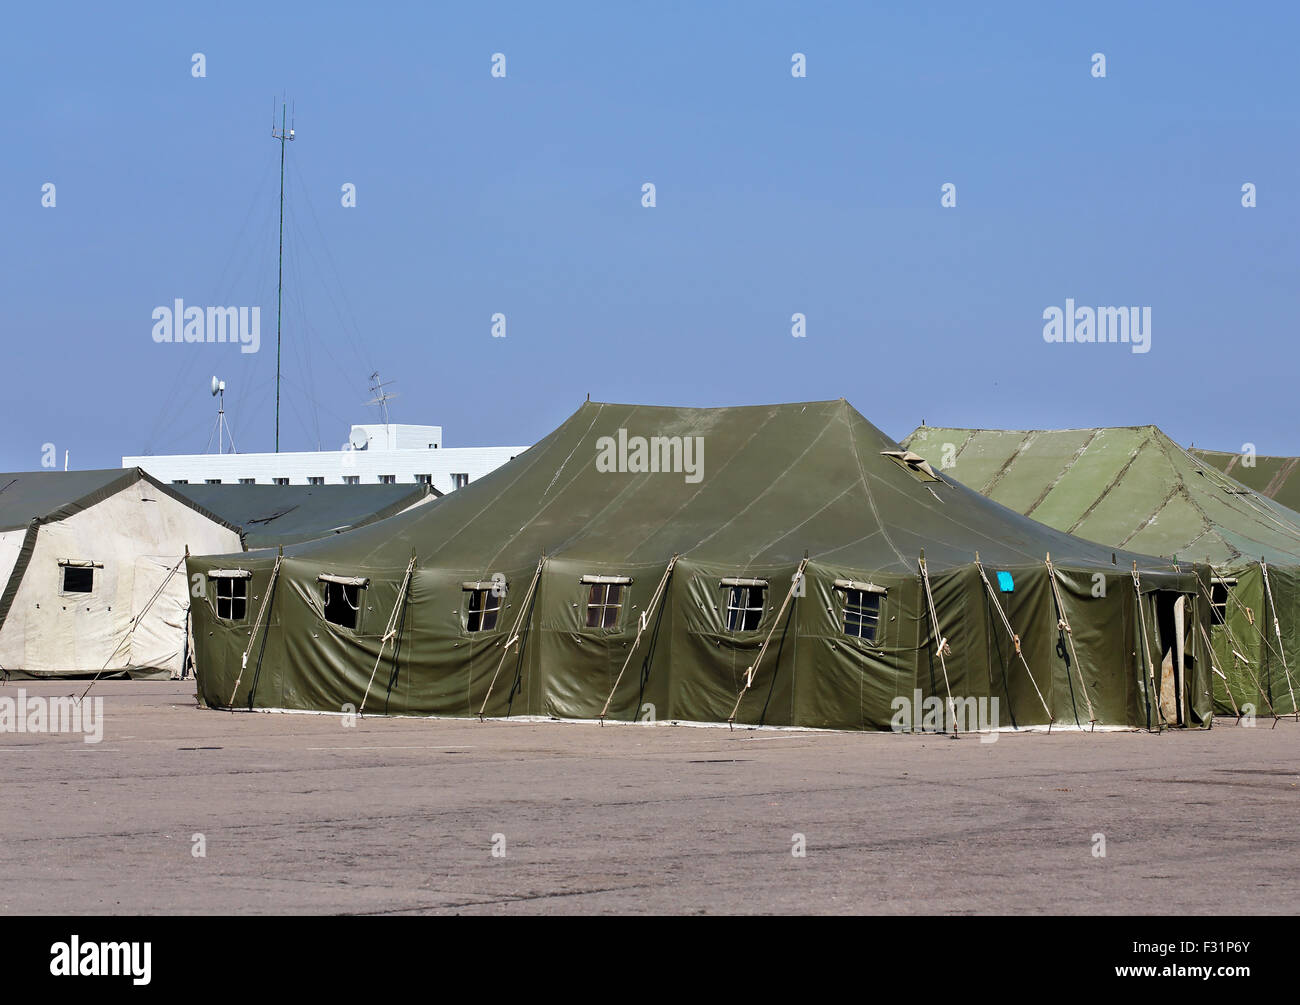 Tents for placement of personnel on military range Stock Photo